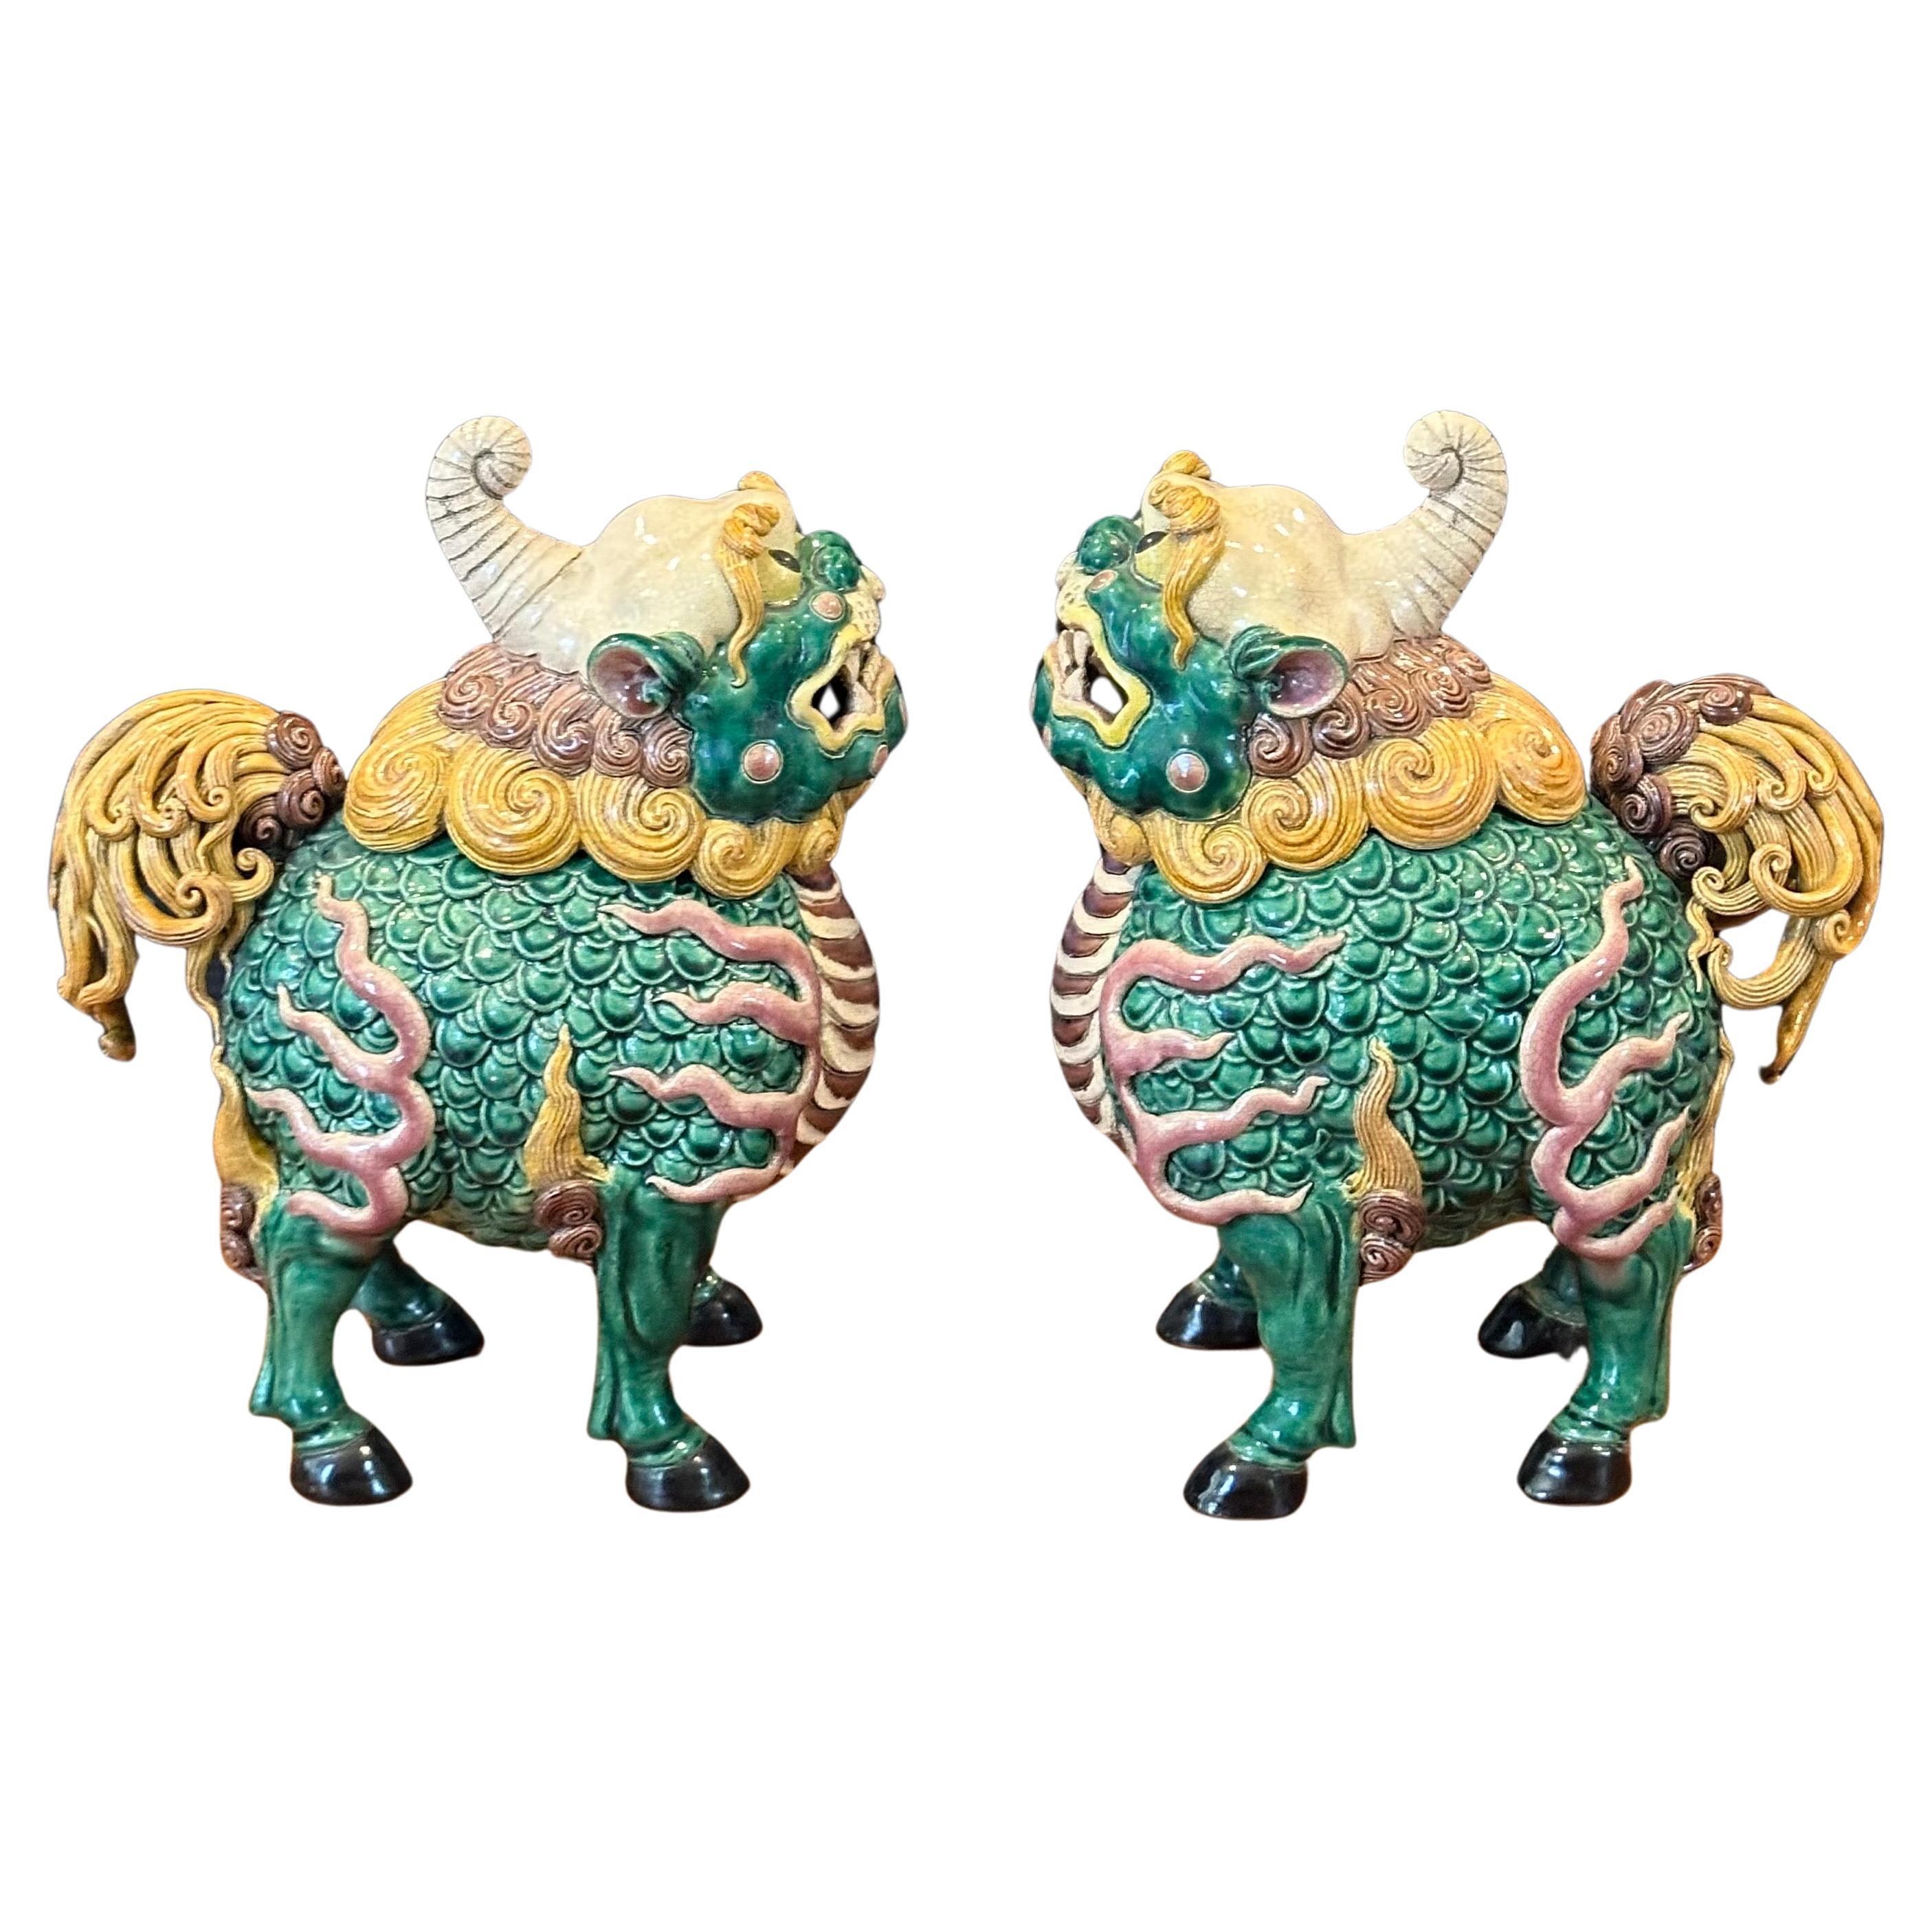 Fantastic pair of mid-century Chinese ceramic polychrome incense censer foo dogs, circa 1970s. Great detail and a beautiful color combination of yellow, green and brown; the pair measure 14